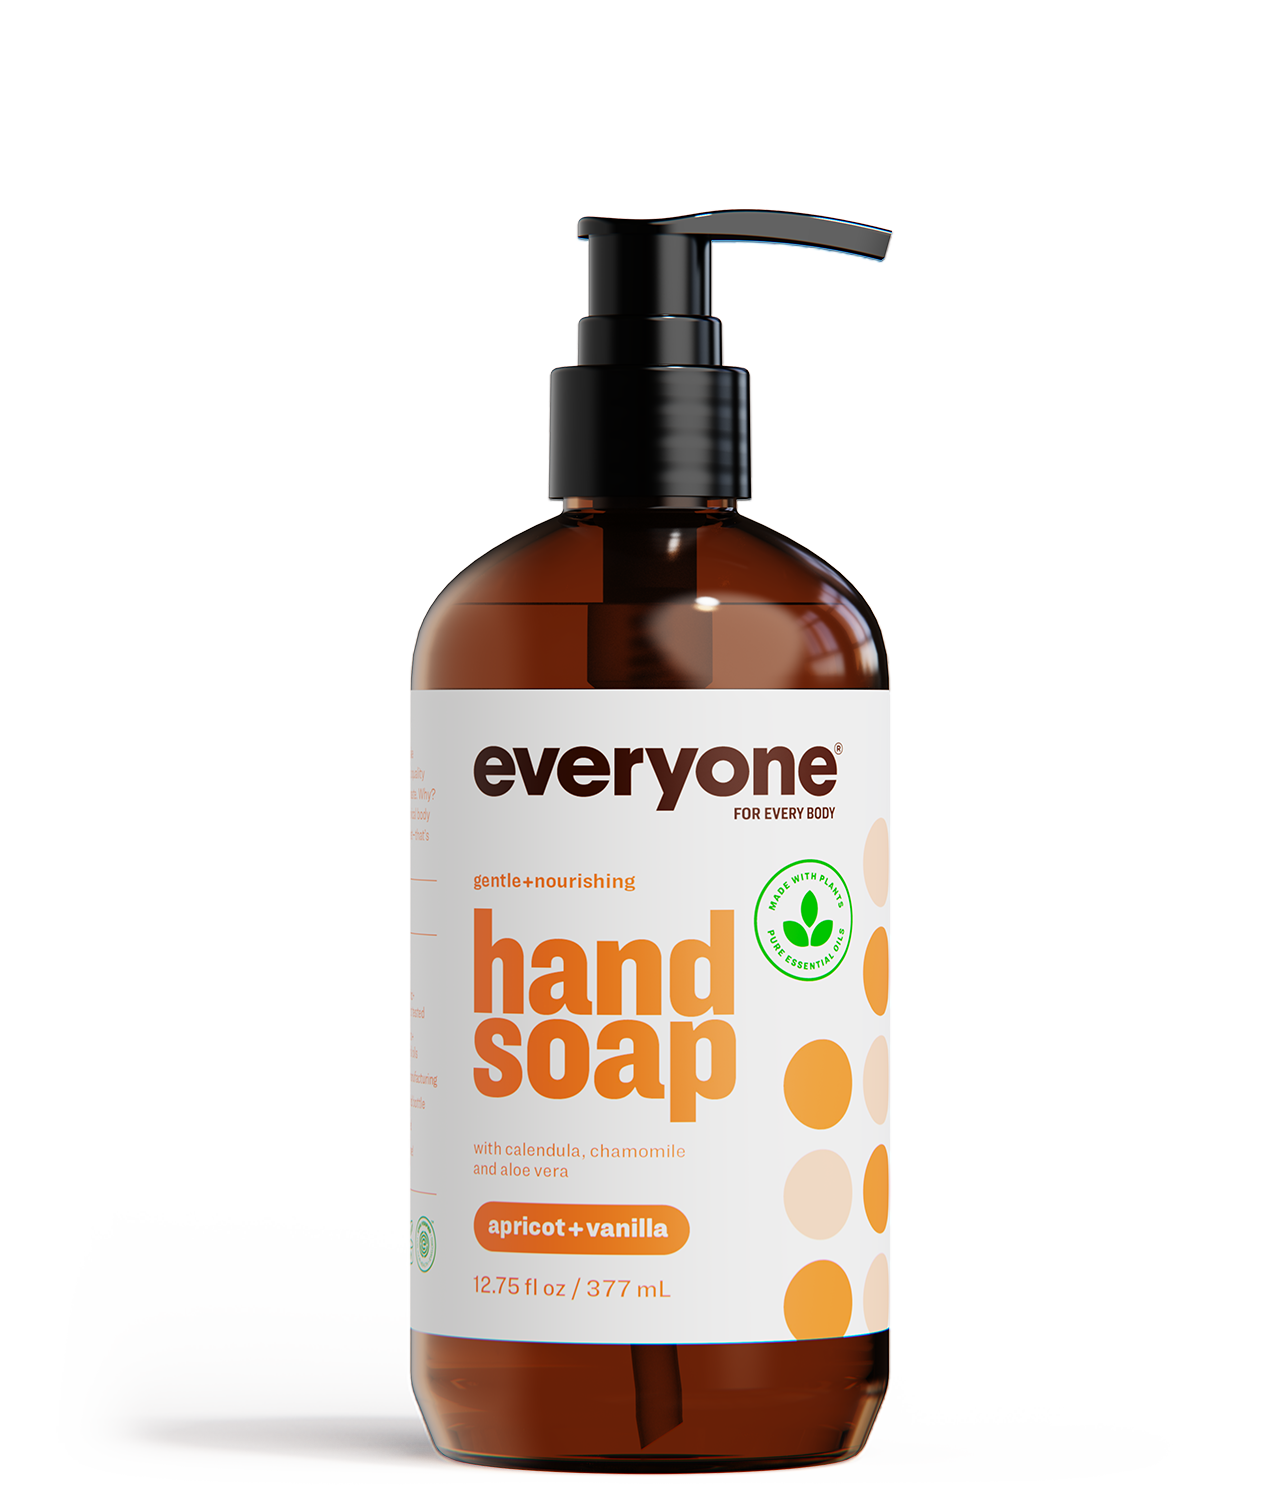 Apricot + Vanilla Hand Soap - ProCare Outlet by EVERYONE